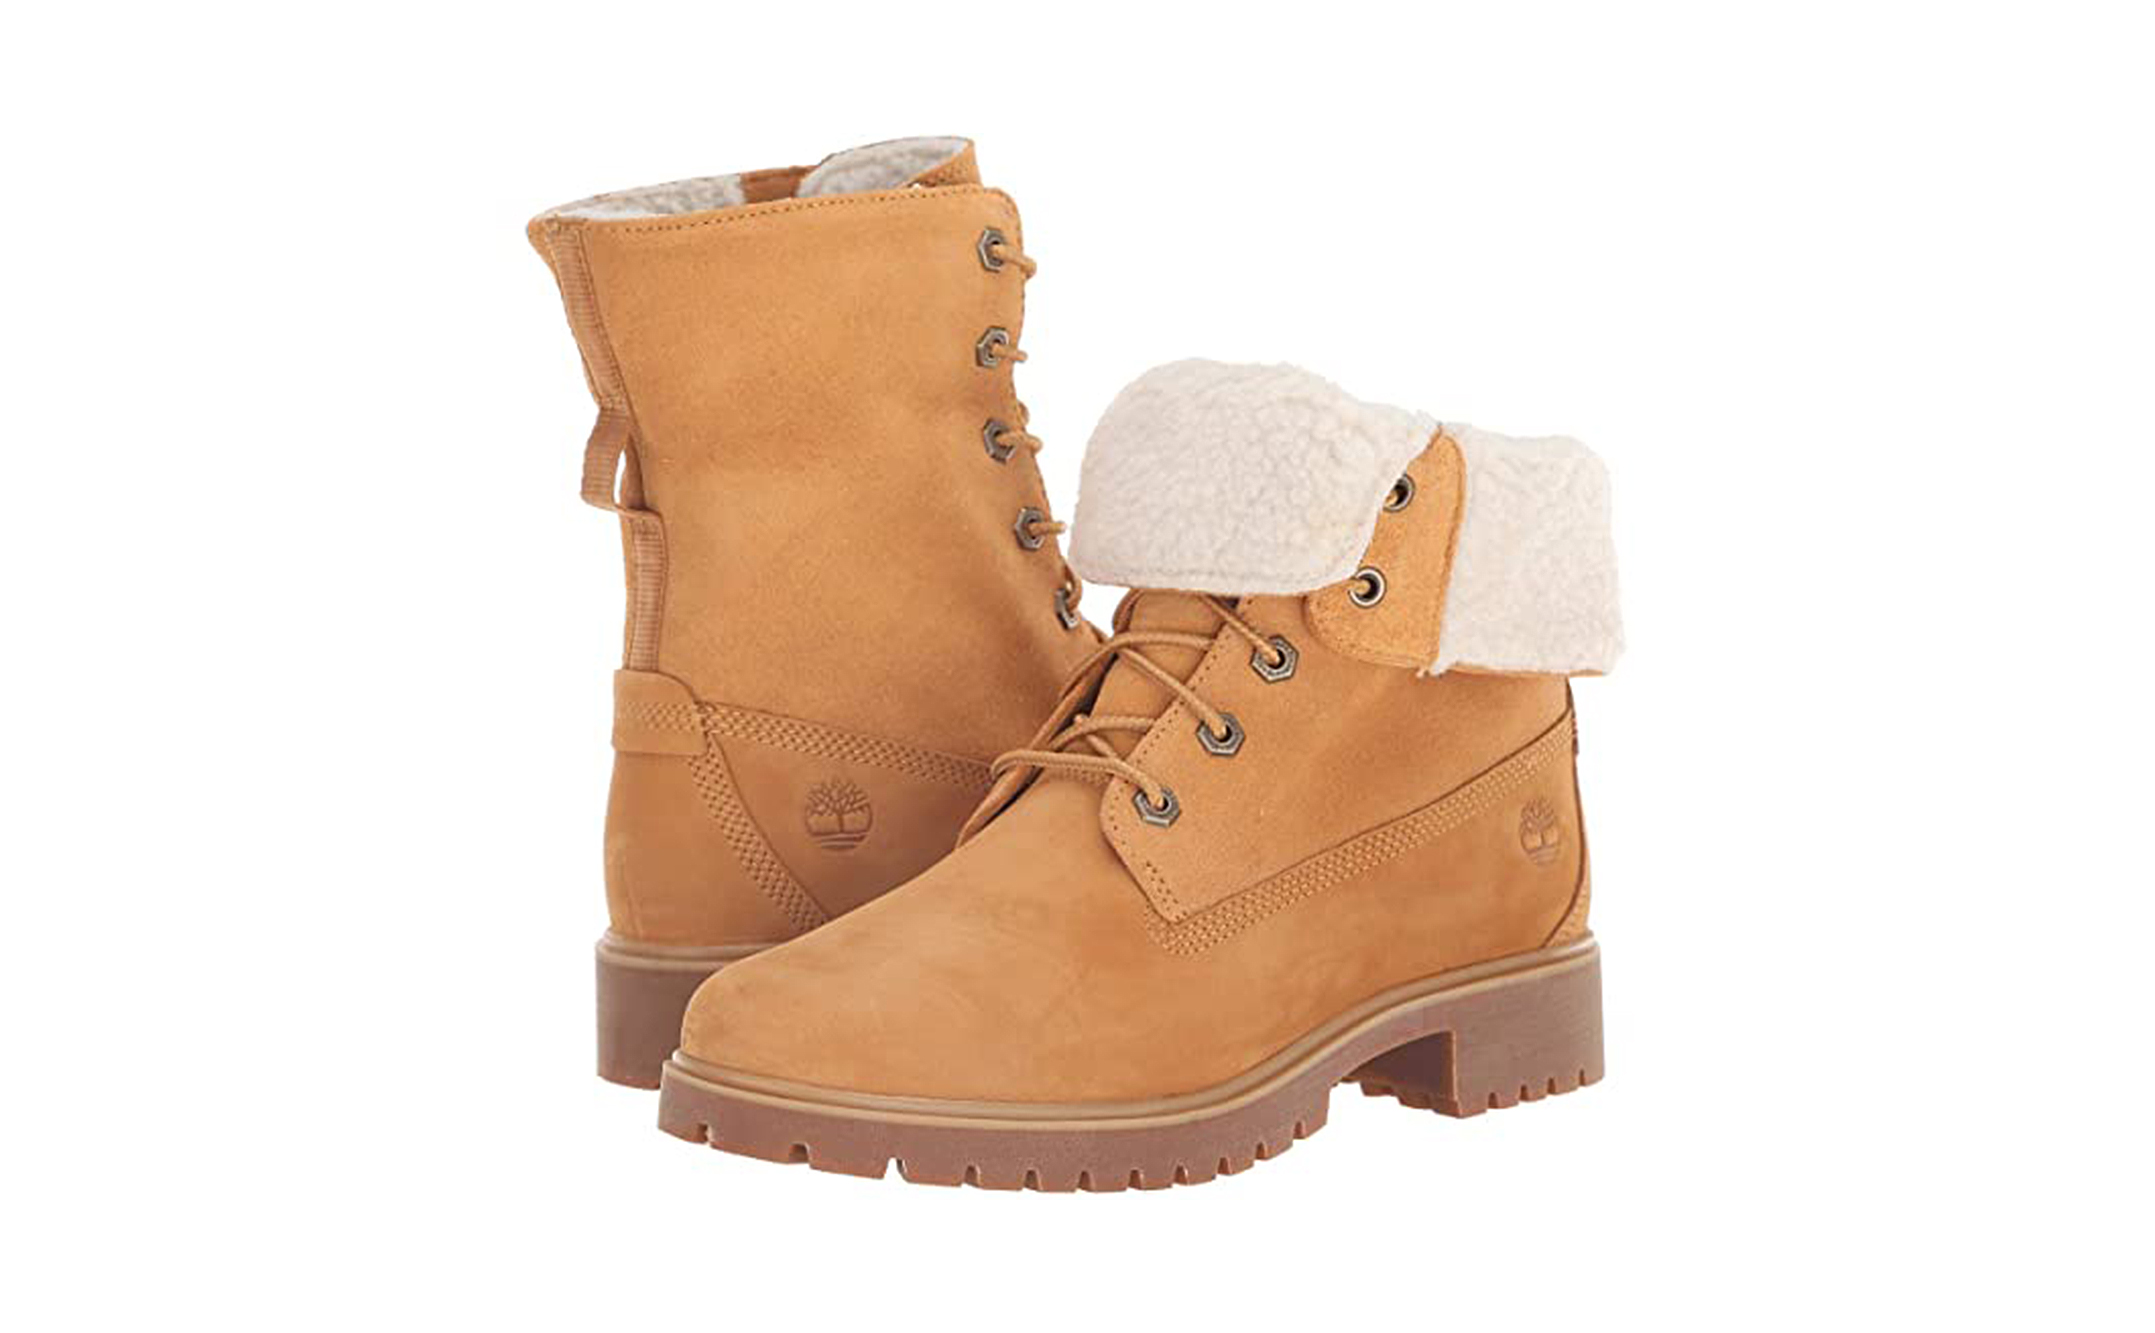 timberland women's shoes sale